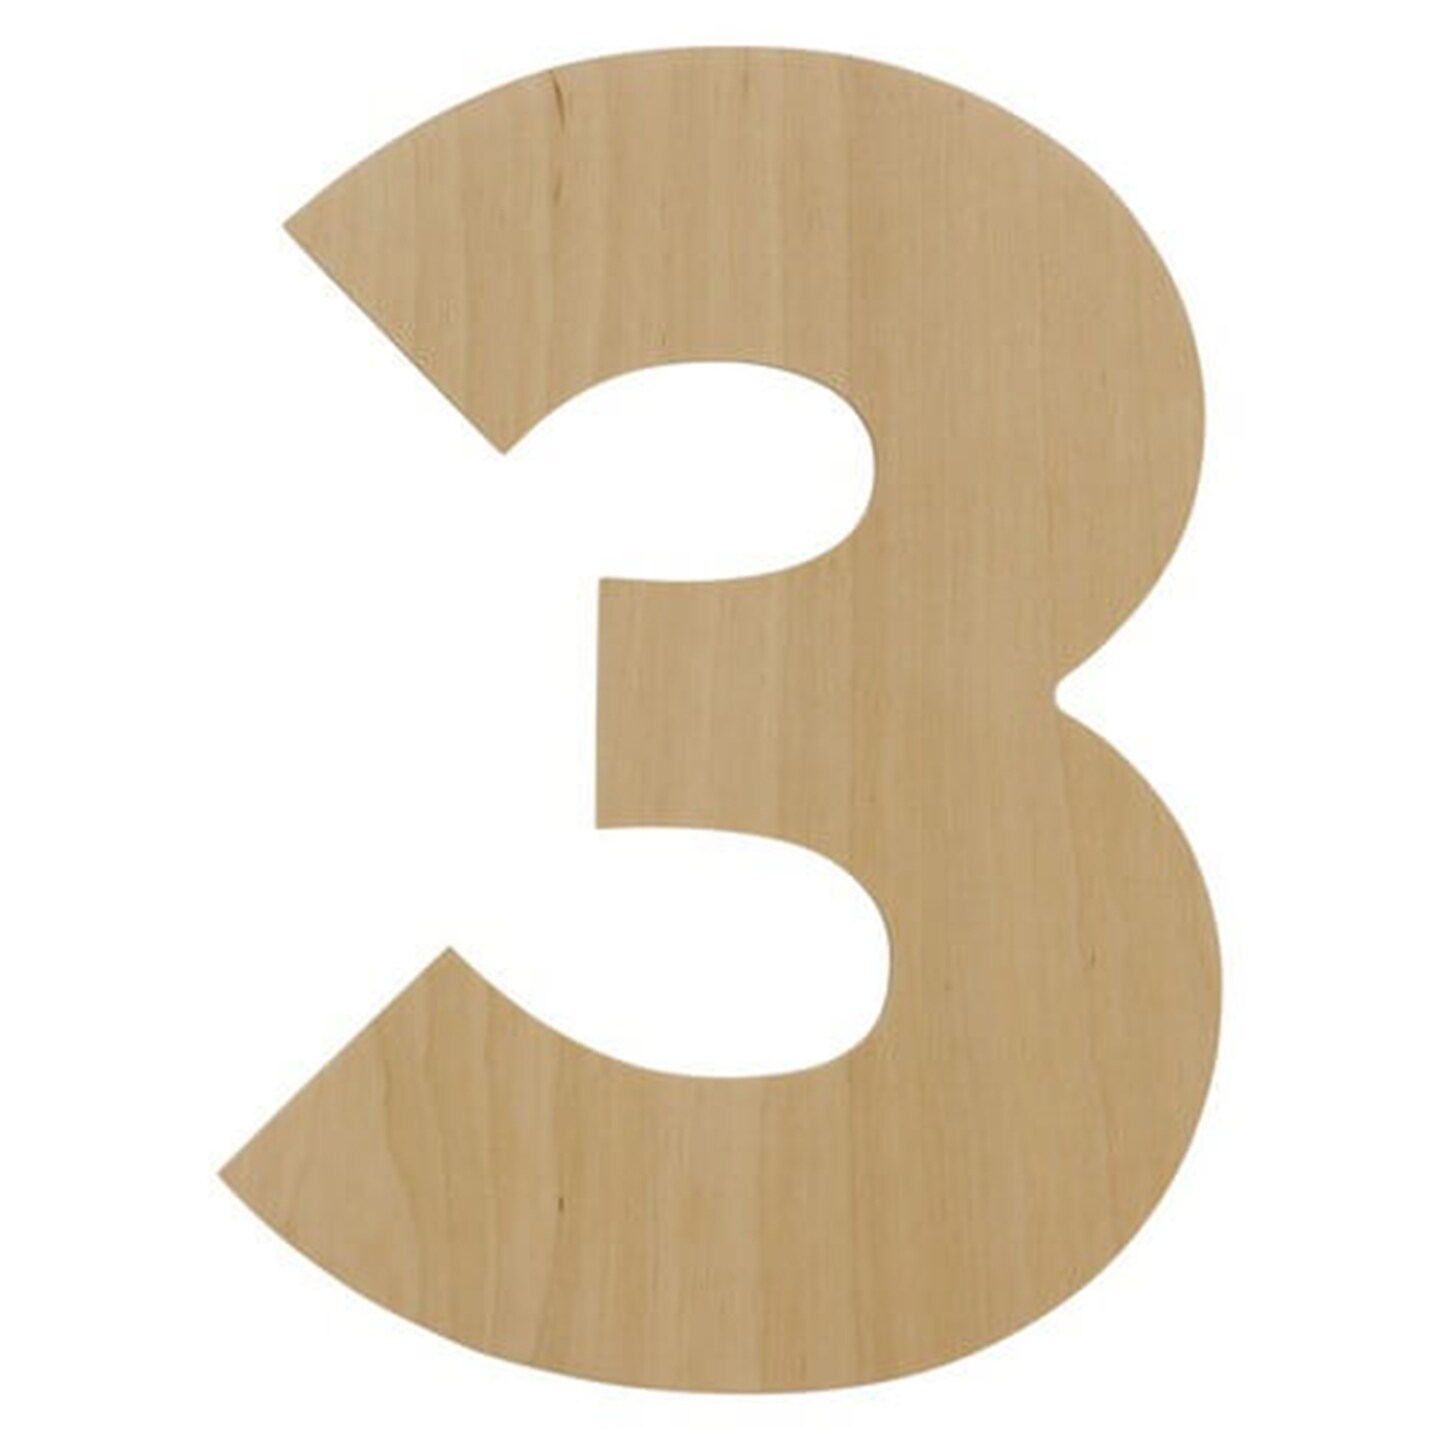 Wooden Number 1, 12 inch, Unfinished Large Wood Numbers for Crafts, Woodpeckers